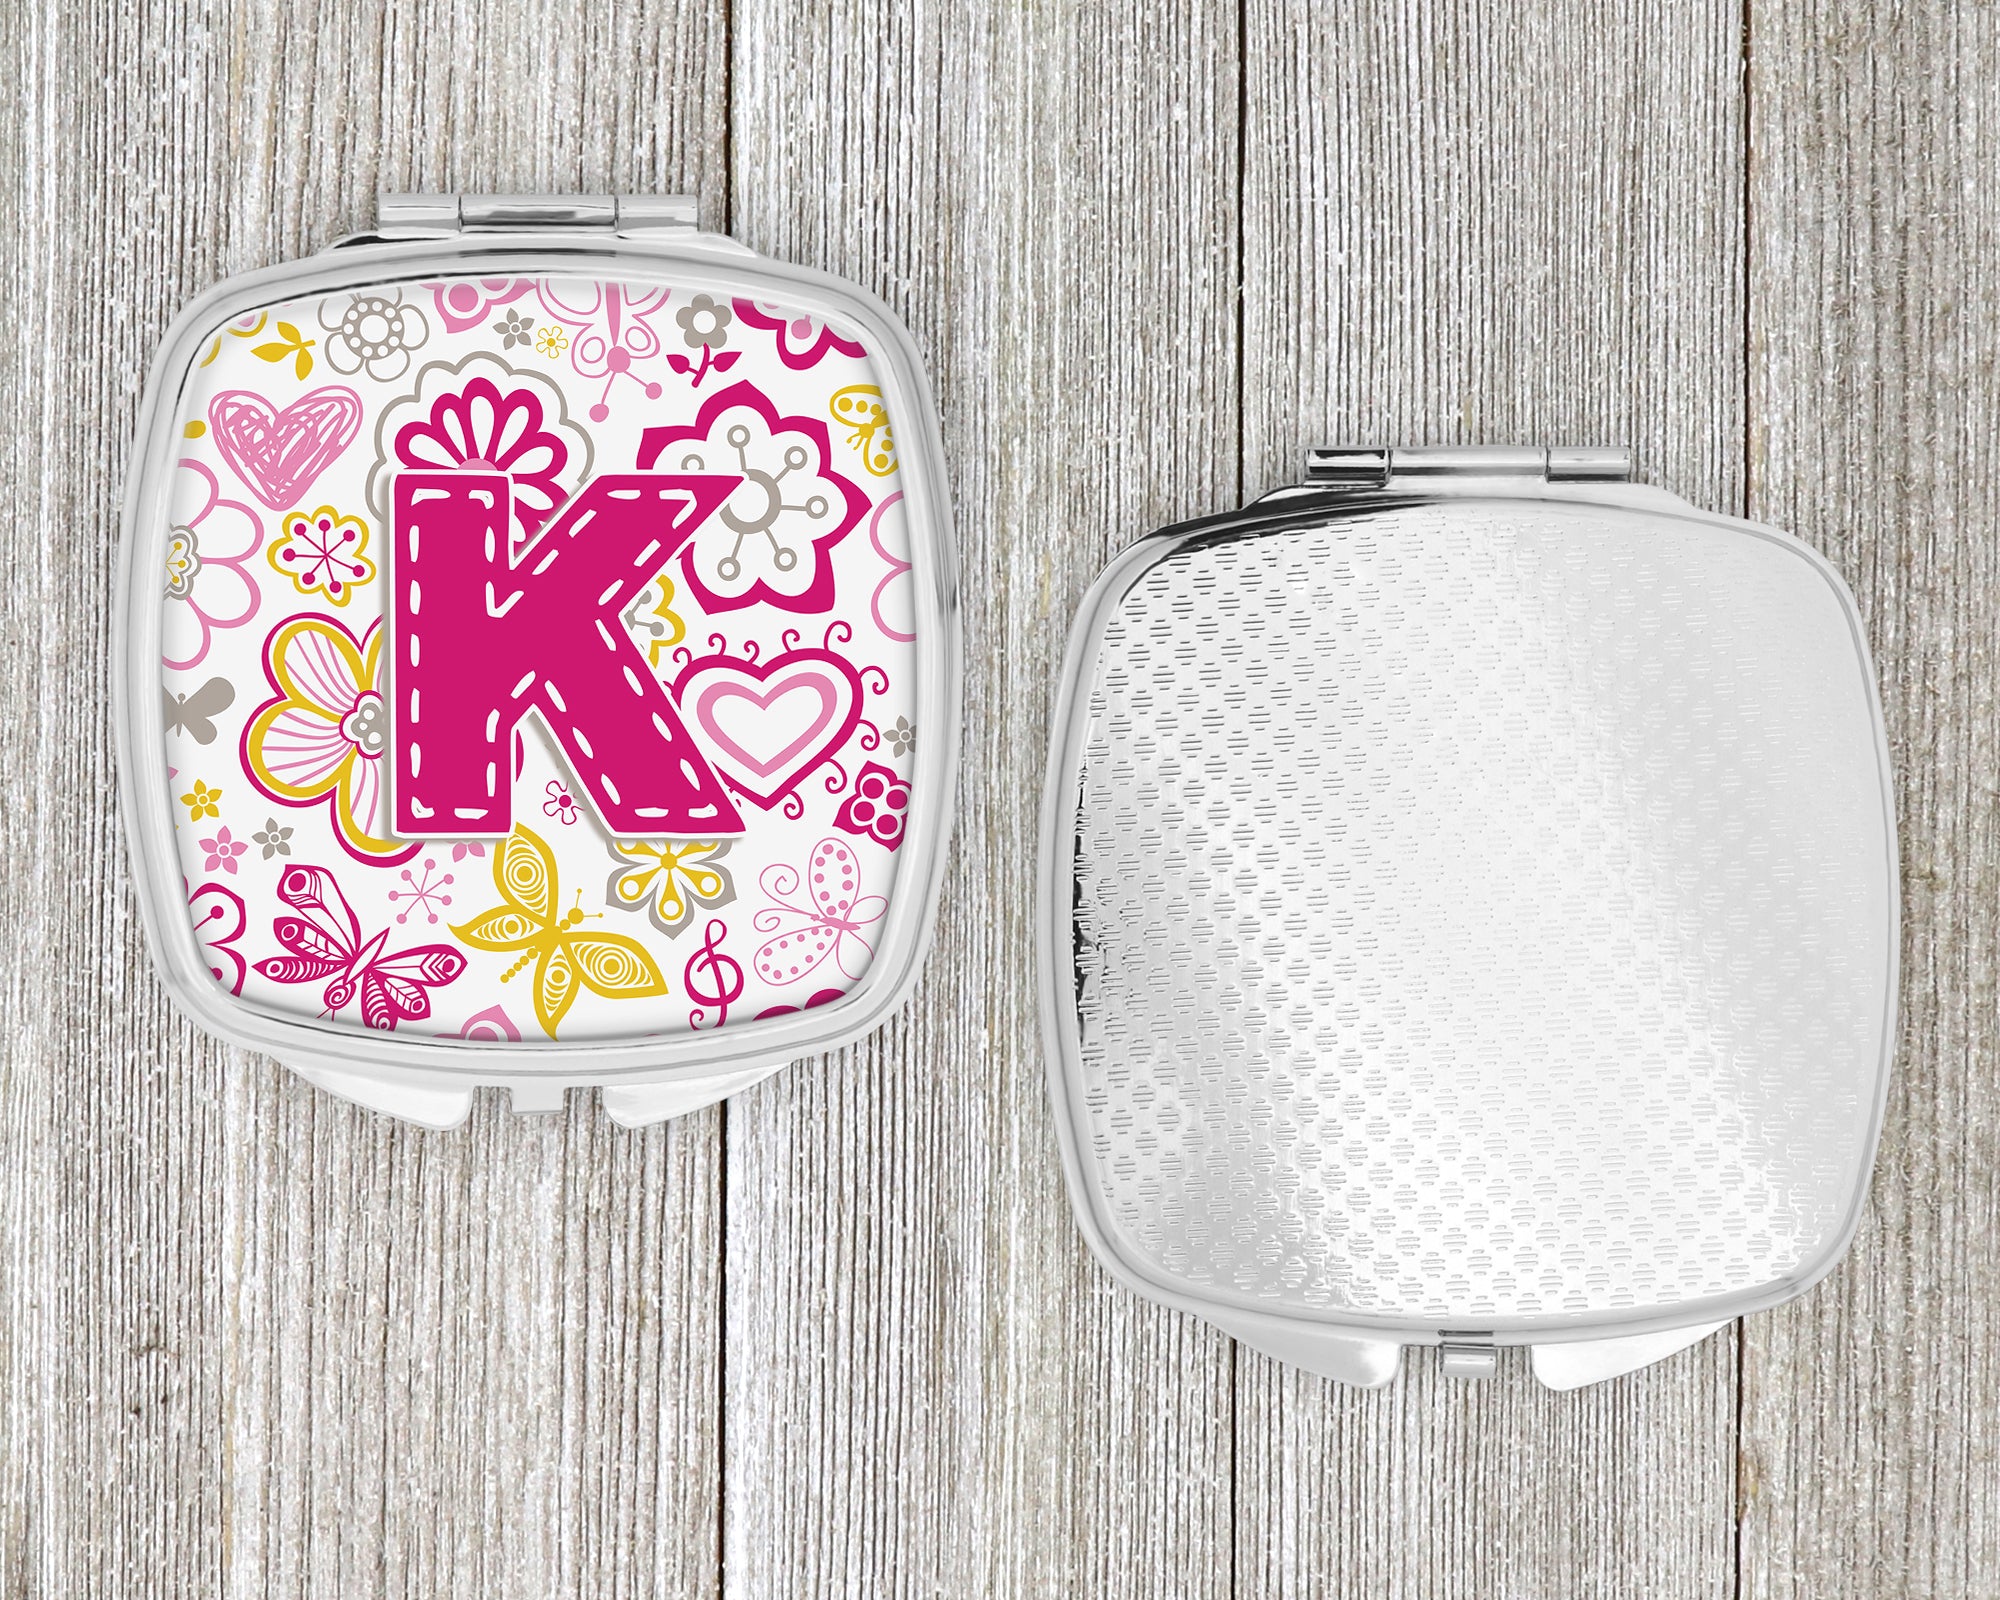 Letter K Flowers and Butterflies Pink Compact Mirror CJ2005-KSCM  the-store.com.